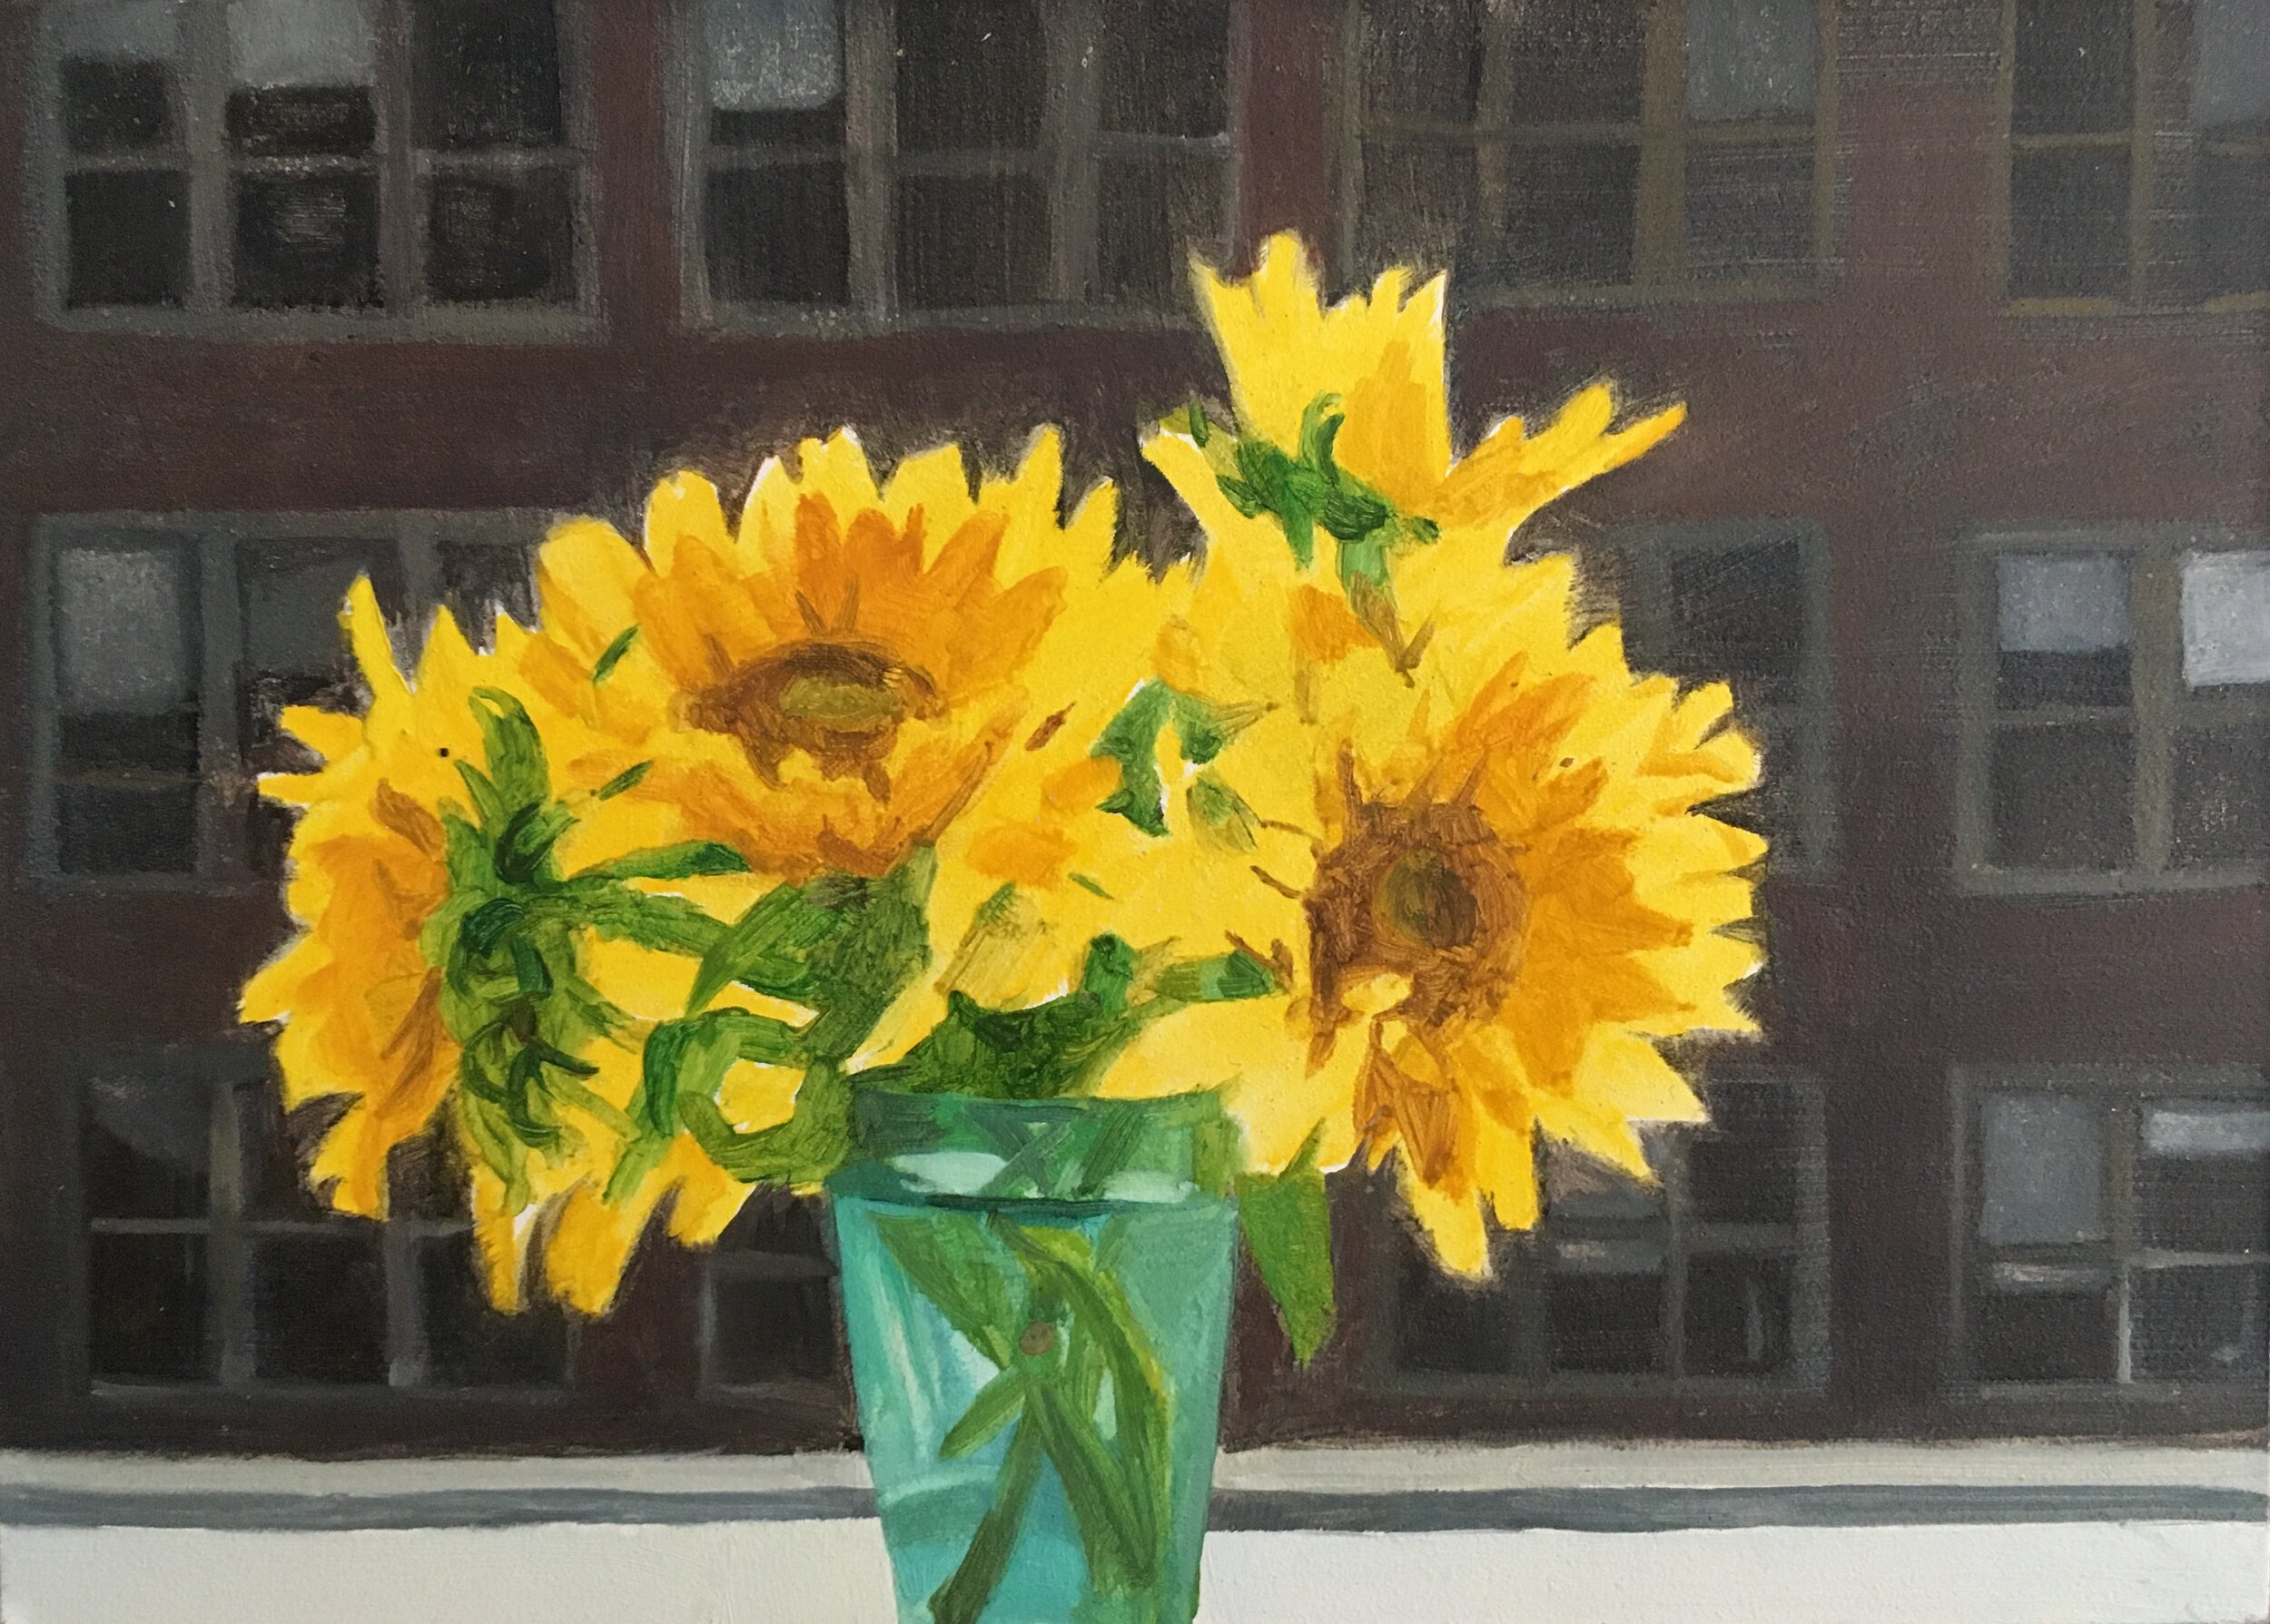 Sunflowers on a Summer Day